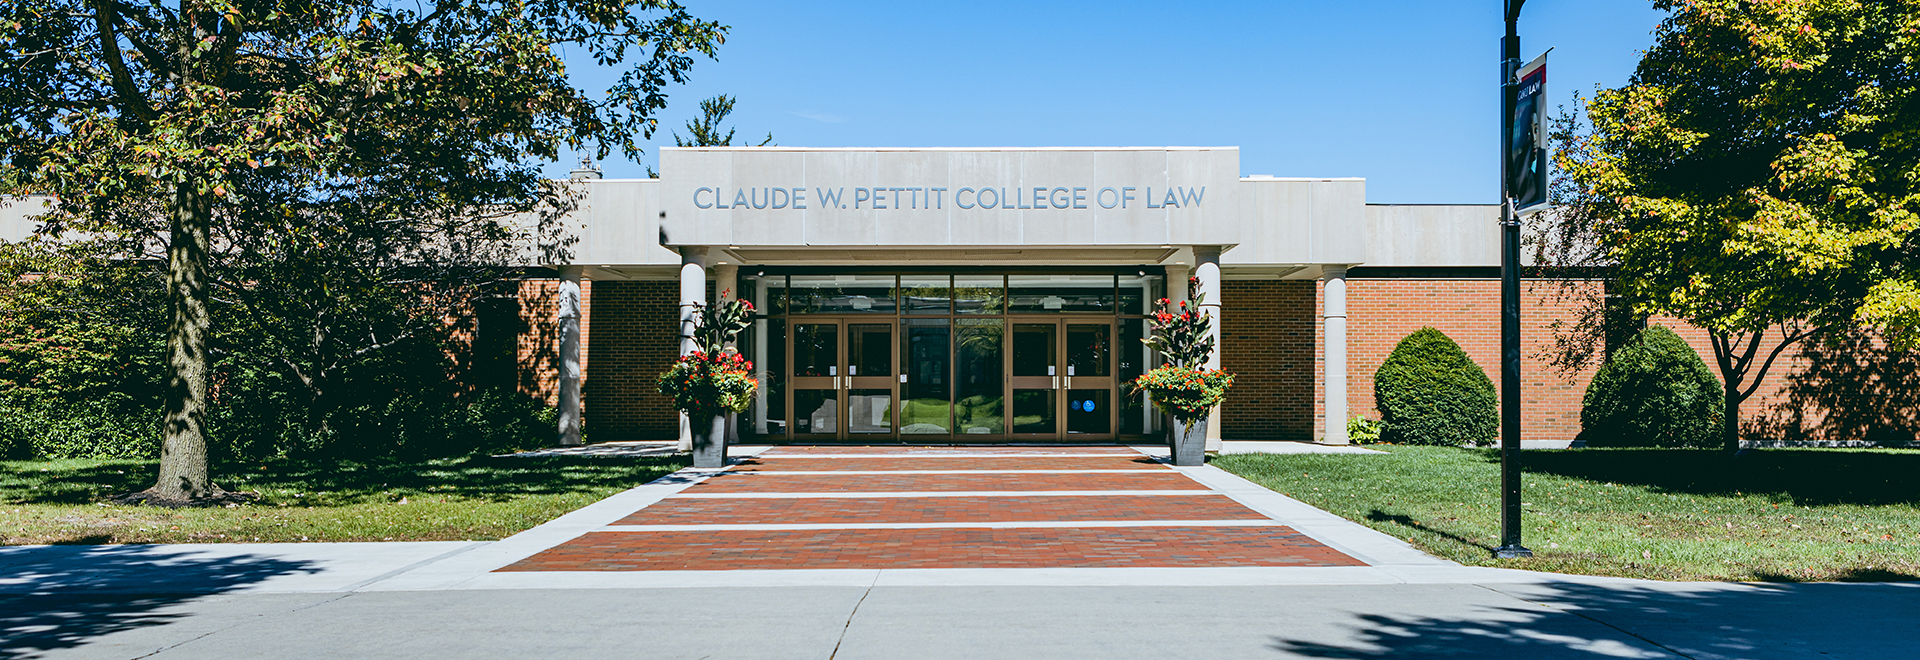 Photo of law building